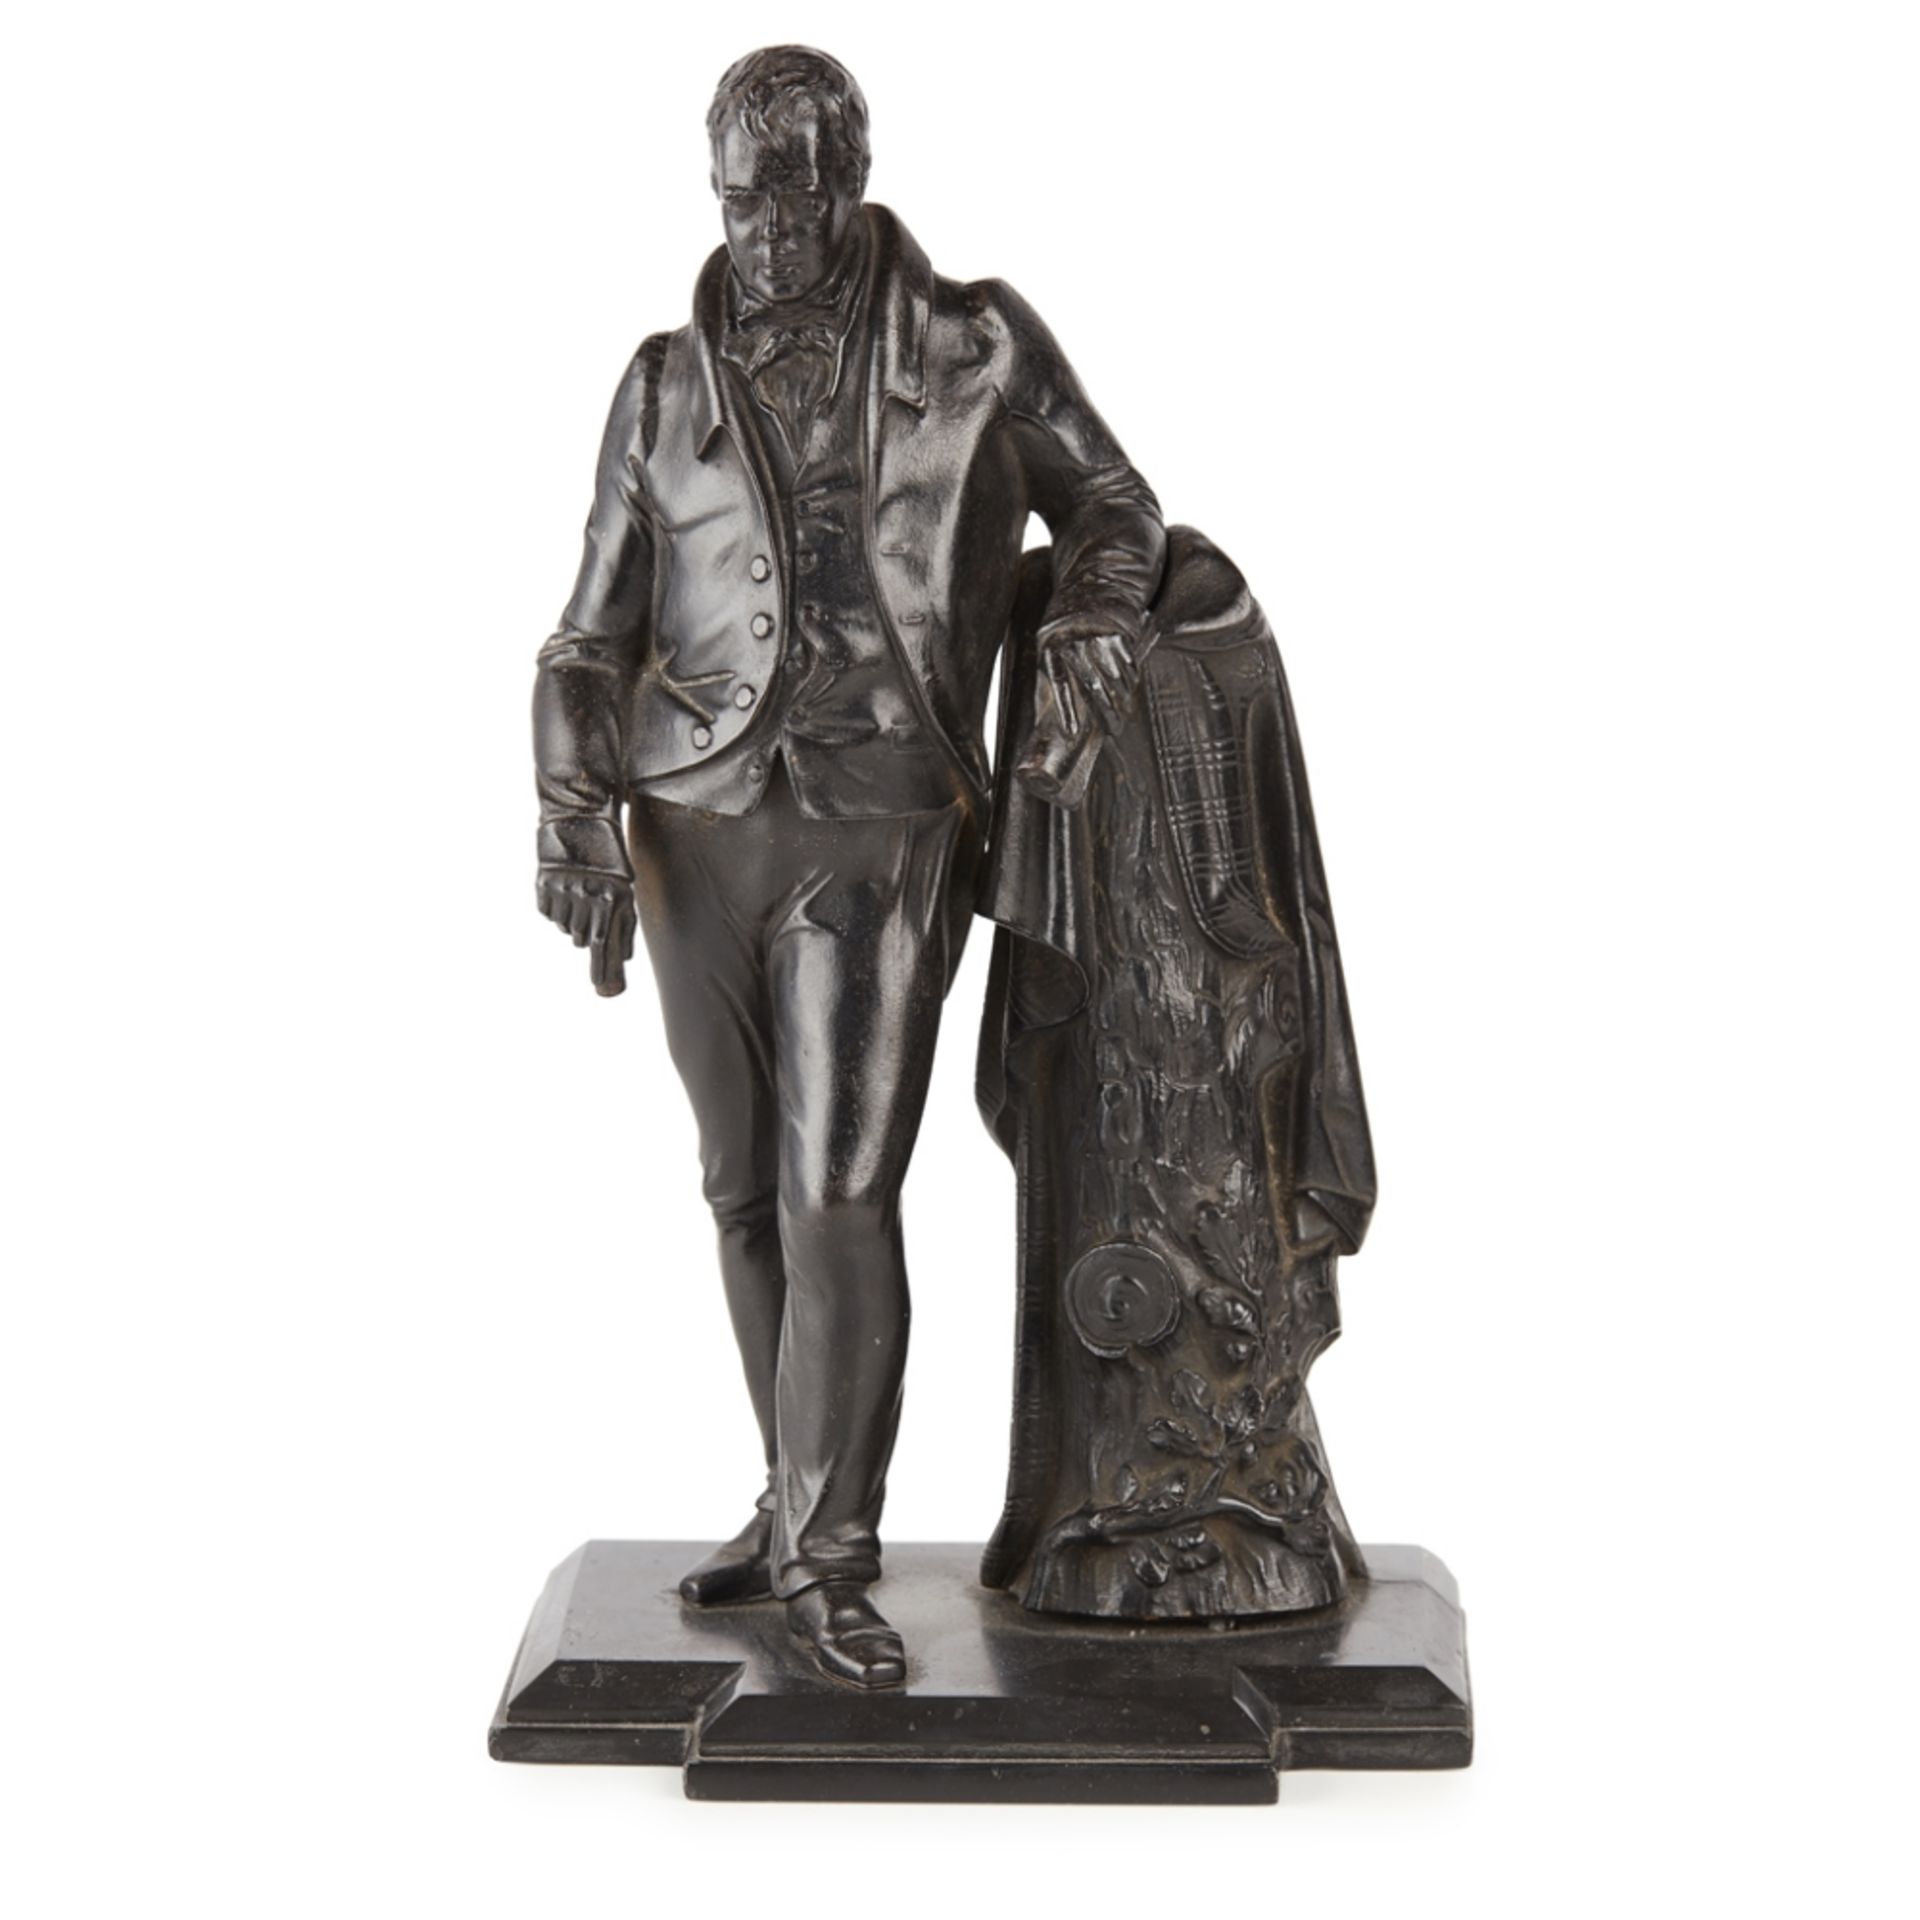 BERLIN IRONWORK FIGURE OF SIR WALTER SCOTTEARLY-MID 19TH CENTURY after a similar model by Johann